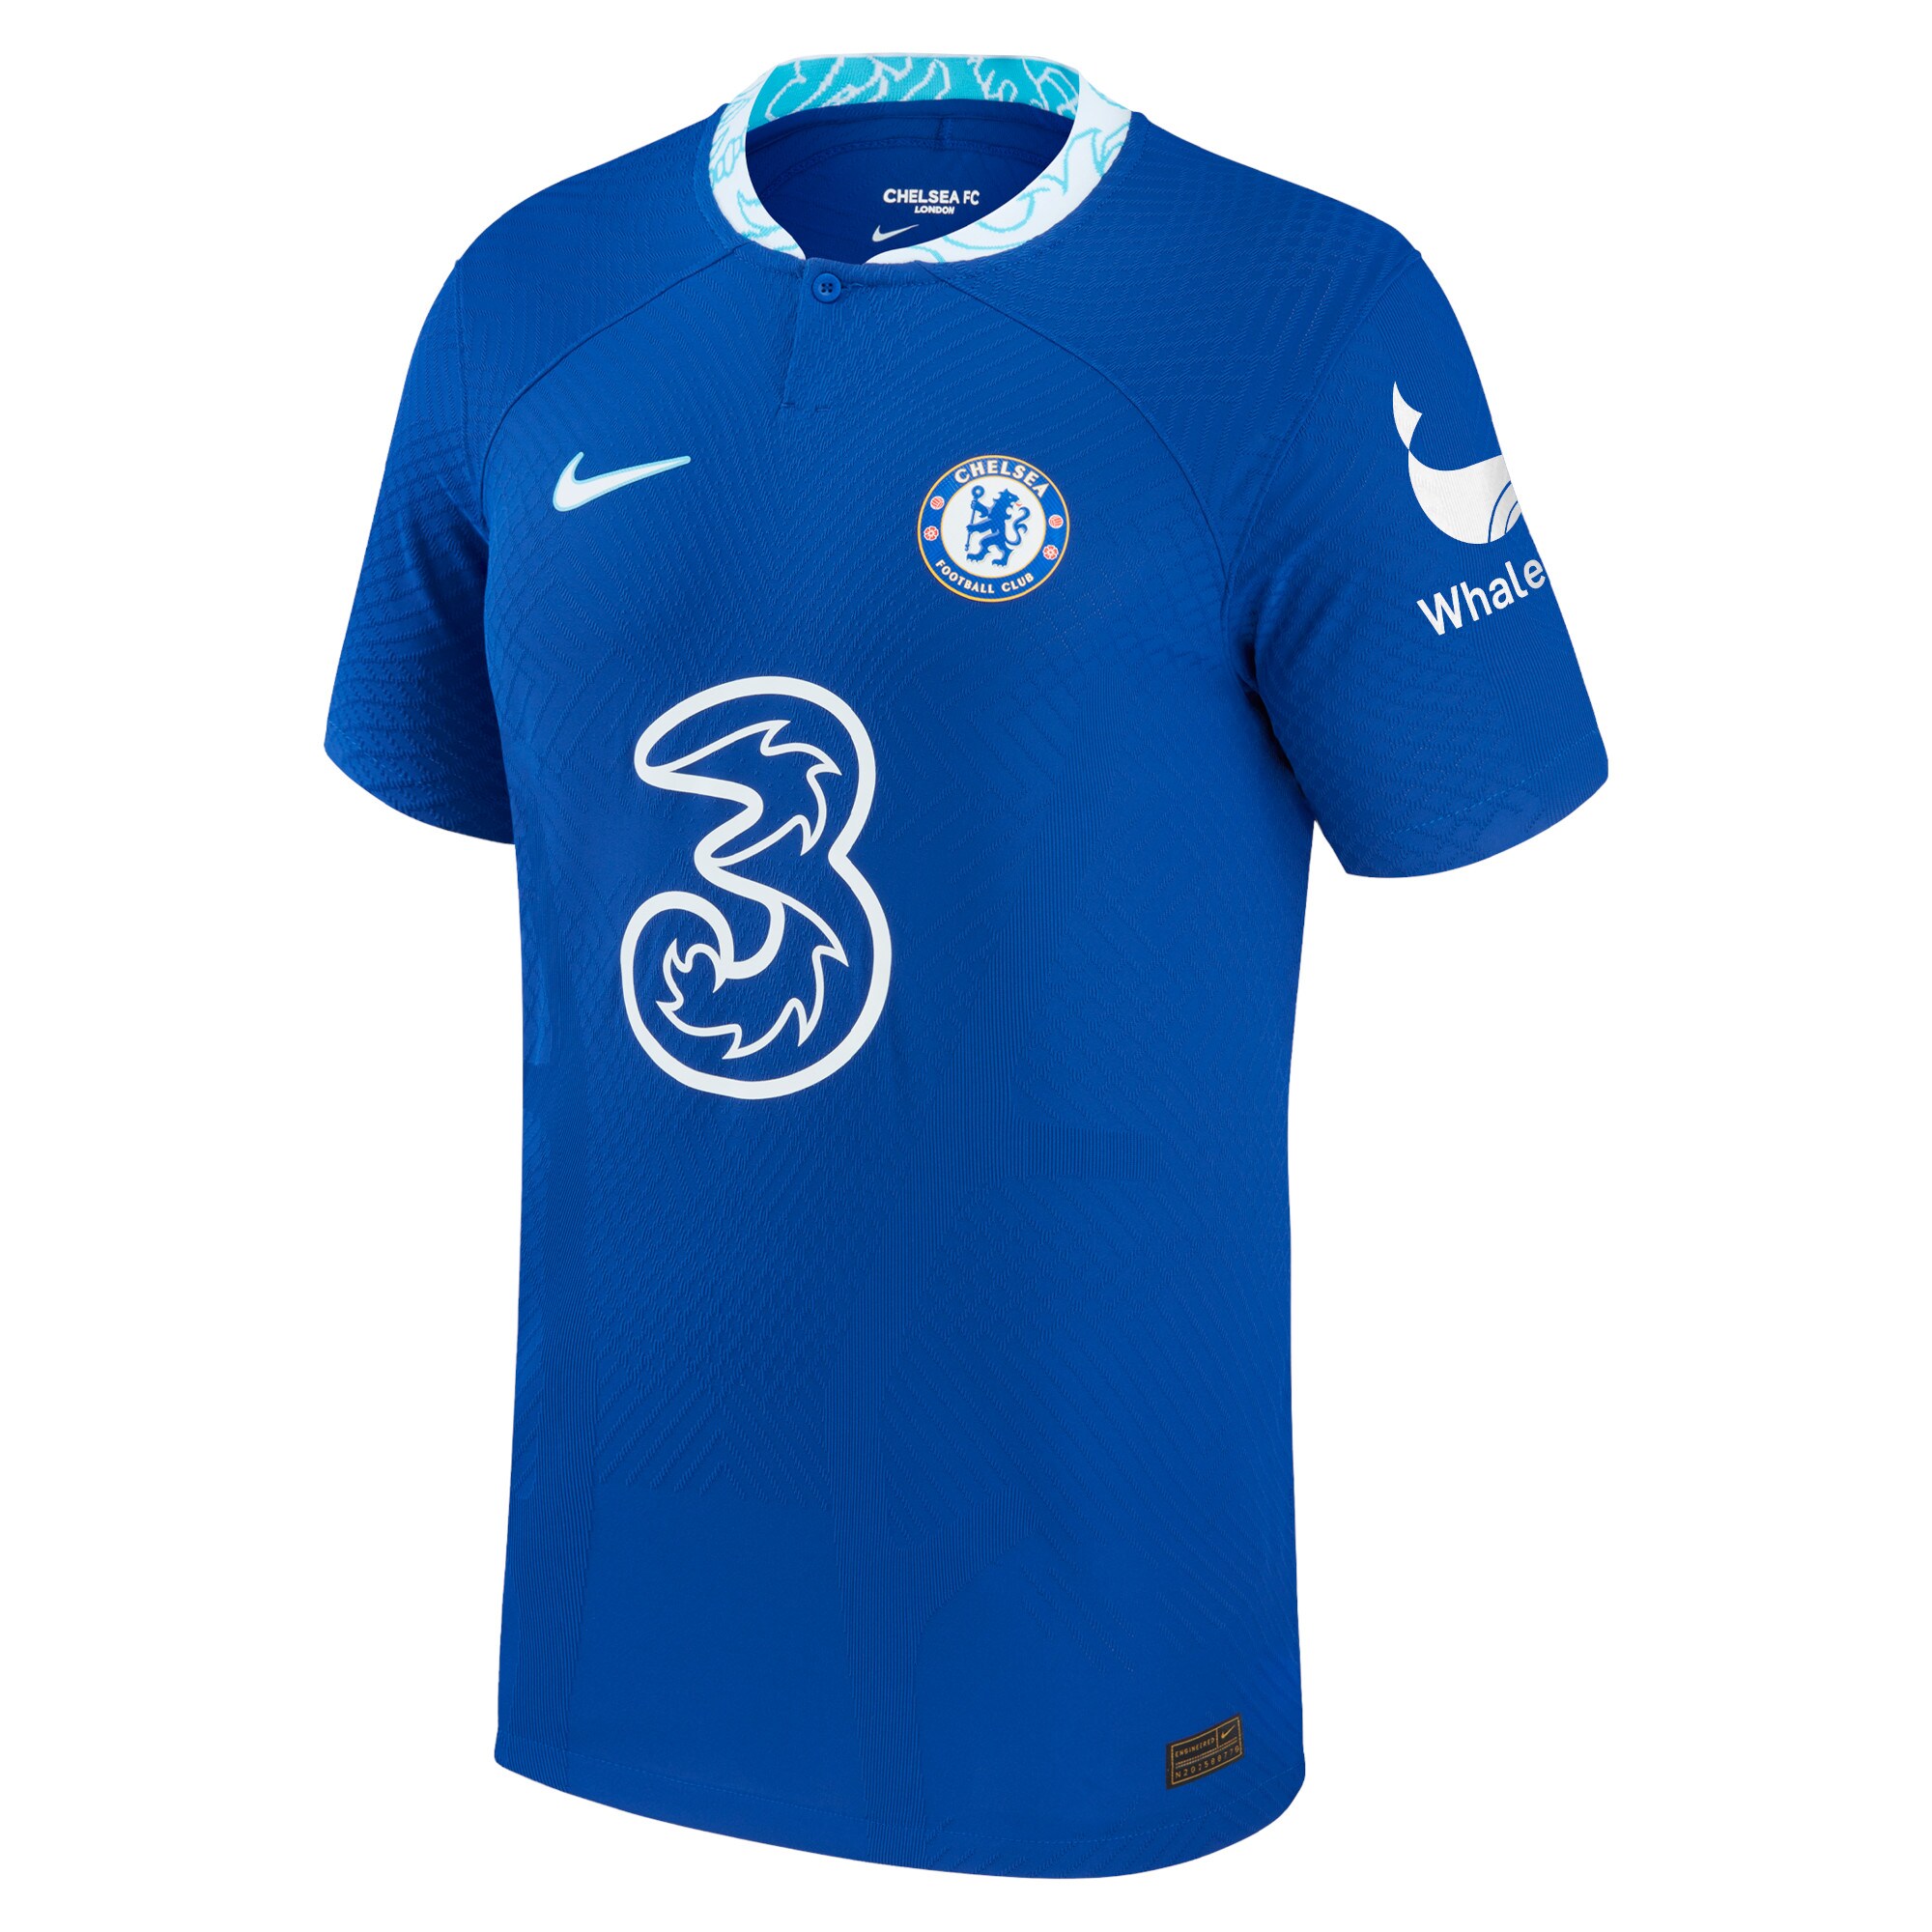 Chelsea Cup Home Vapor Match Shirt 2022-23 with Cuthbert 22 printing